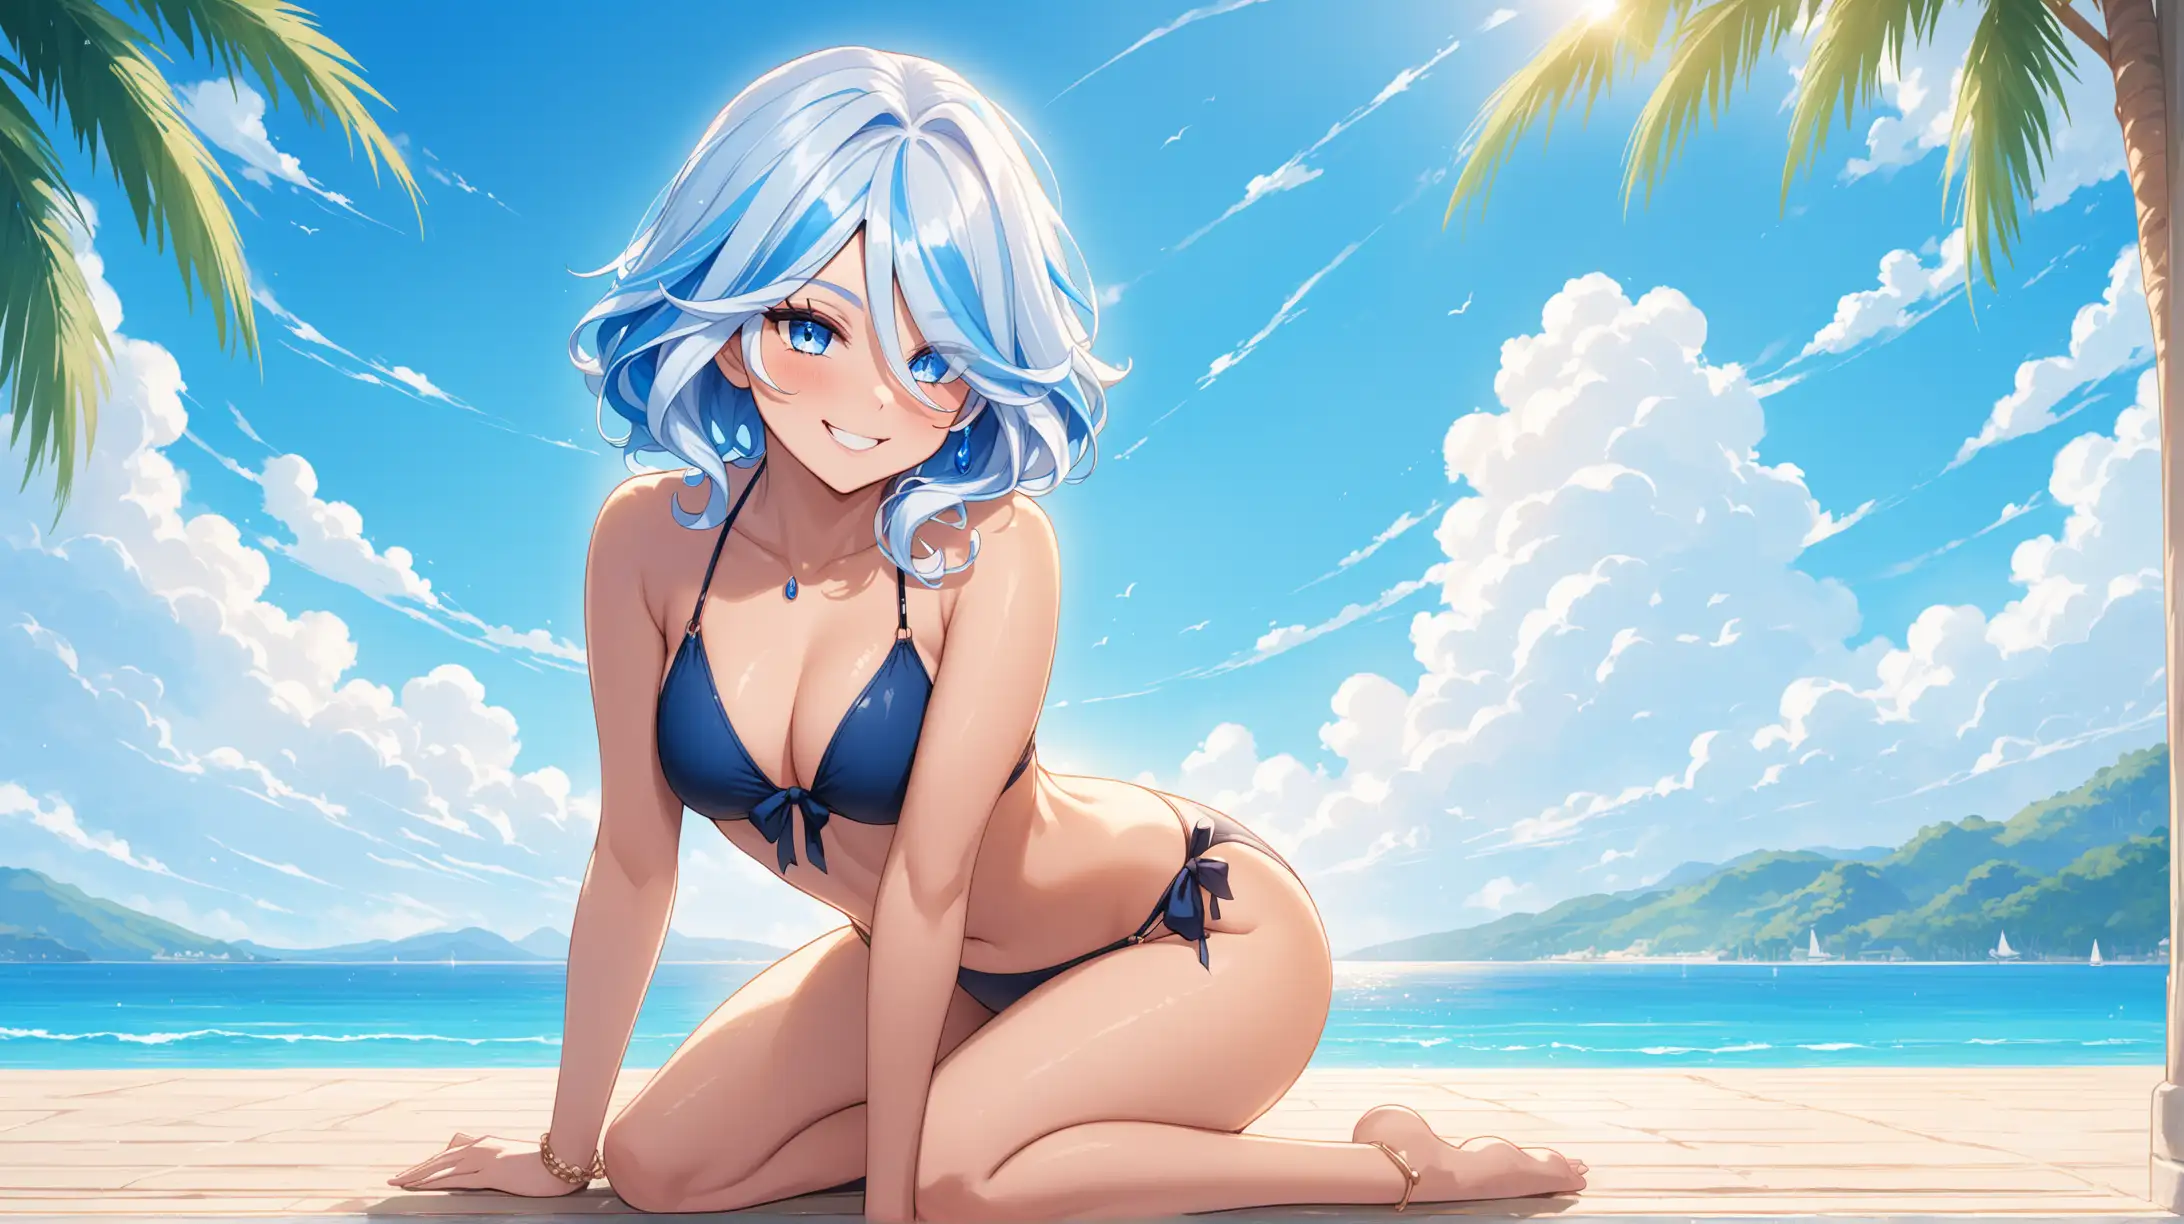 Draw the character Furina, high quality, natural lighting, long shot, outdoors, seductive pose, swimsuit, smiling